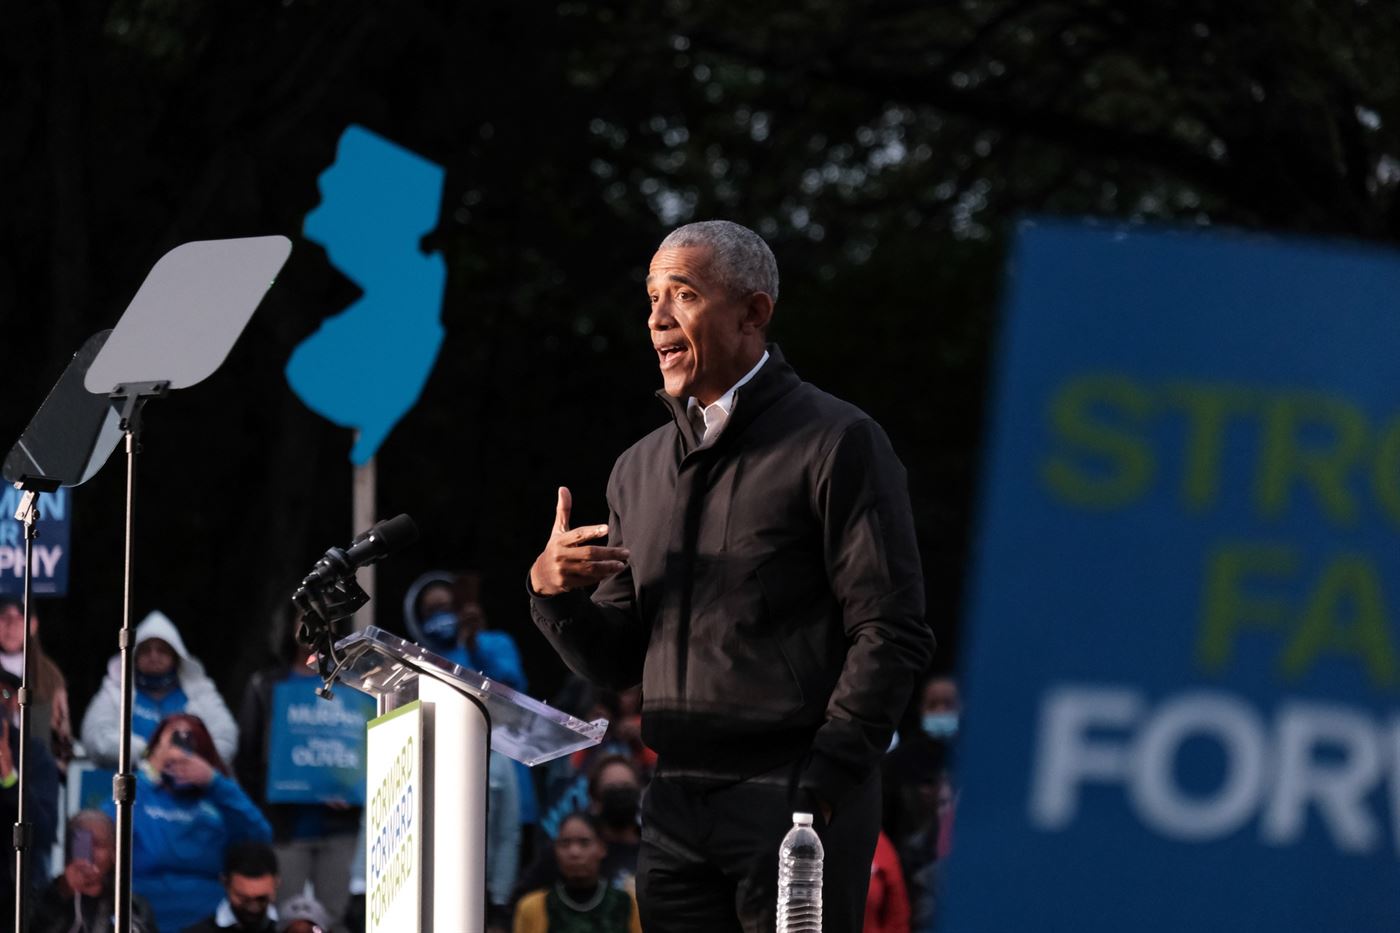 Former President Barack Obama speaking at the Murphy Oliver rally. Michael Callejas | The Montclarion